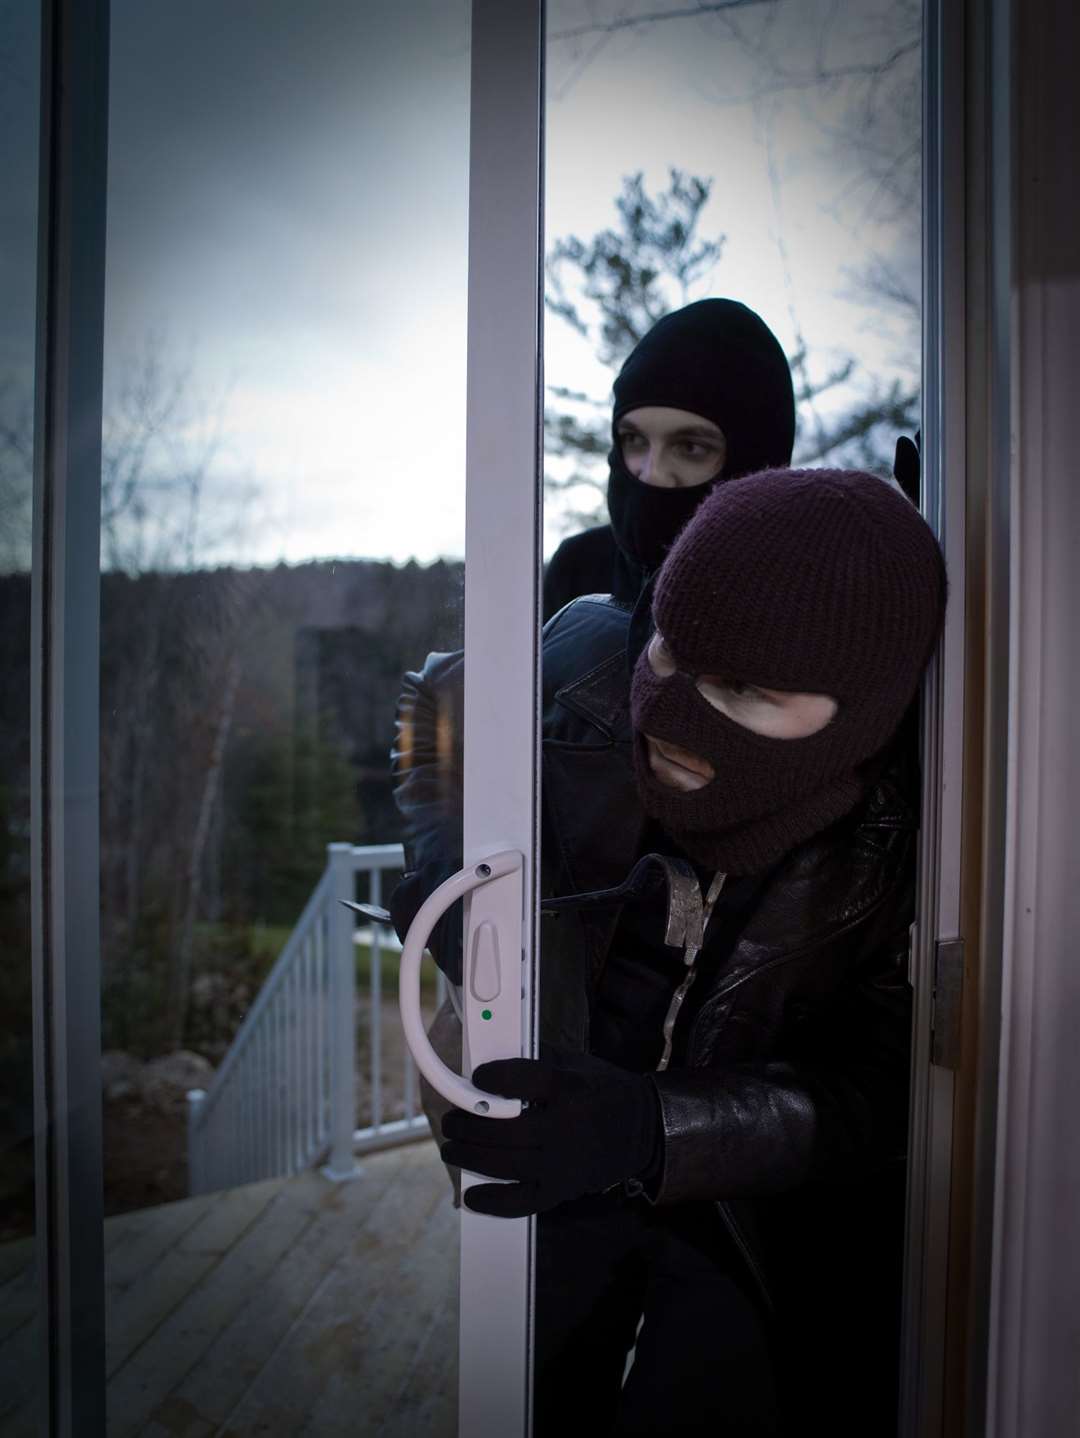 Two men entered a Westwell home and threatened the occupant with knives. Stock image.